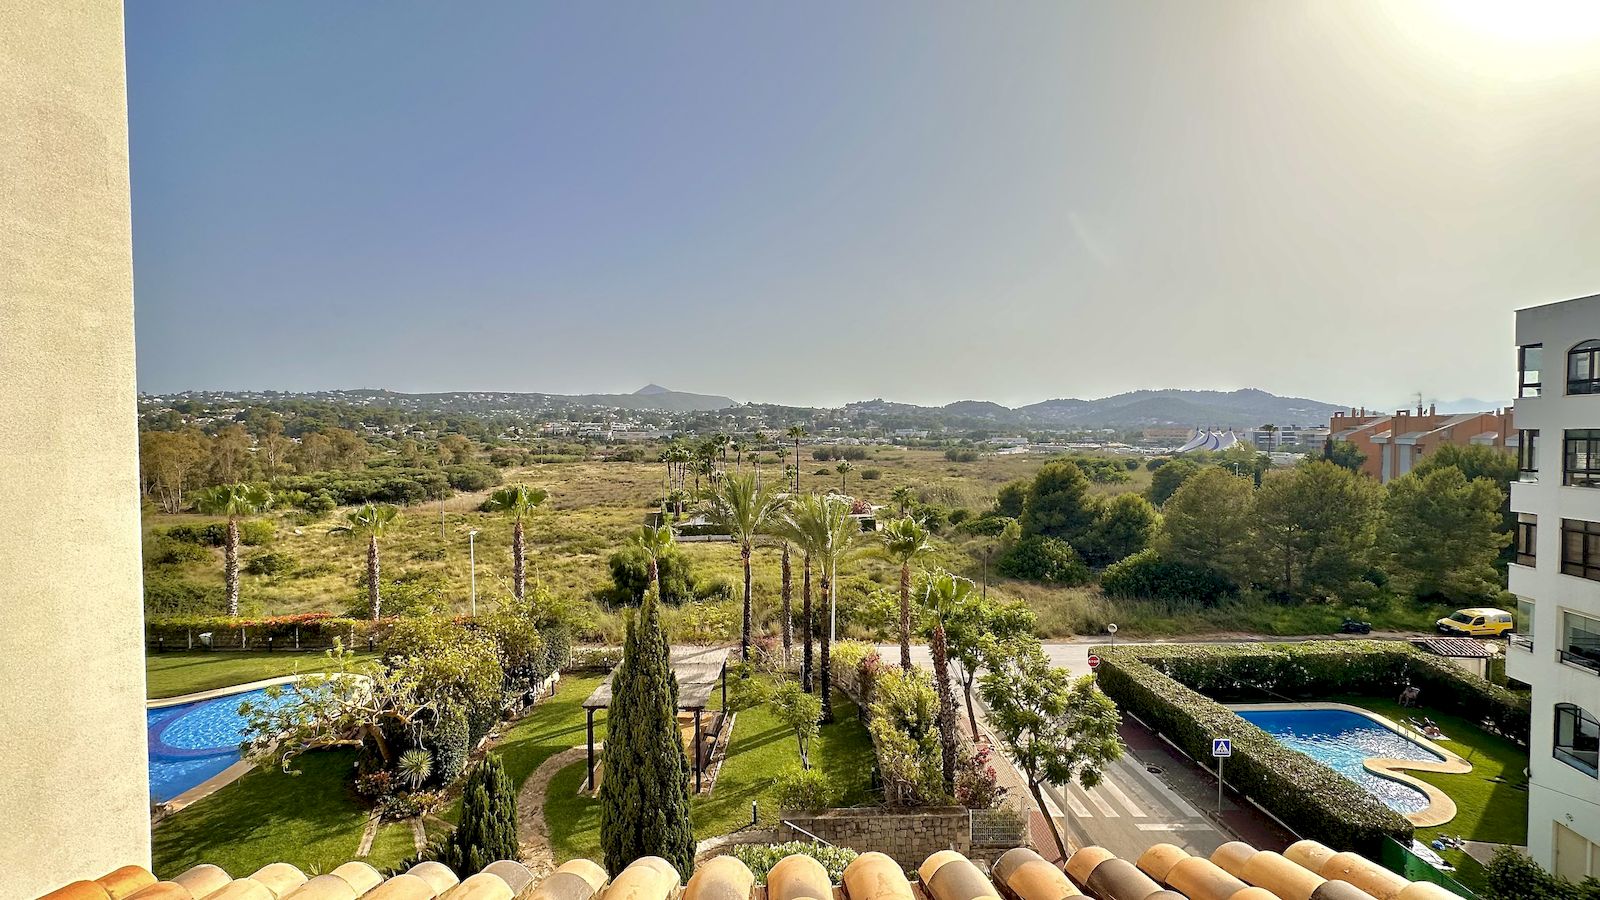 Duplex Penthouse Apartment for Sale with partial sea view on the Playa del Arenal - Javea